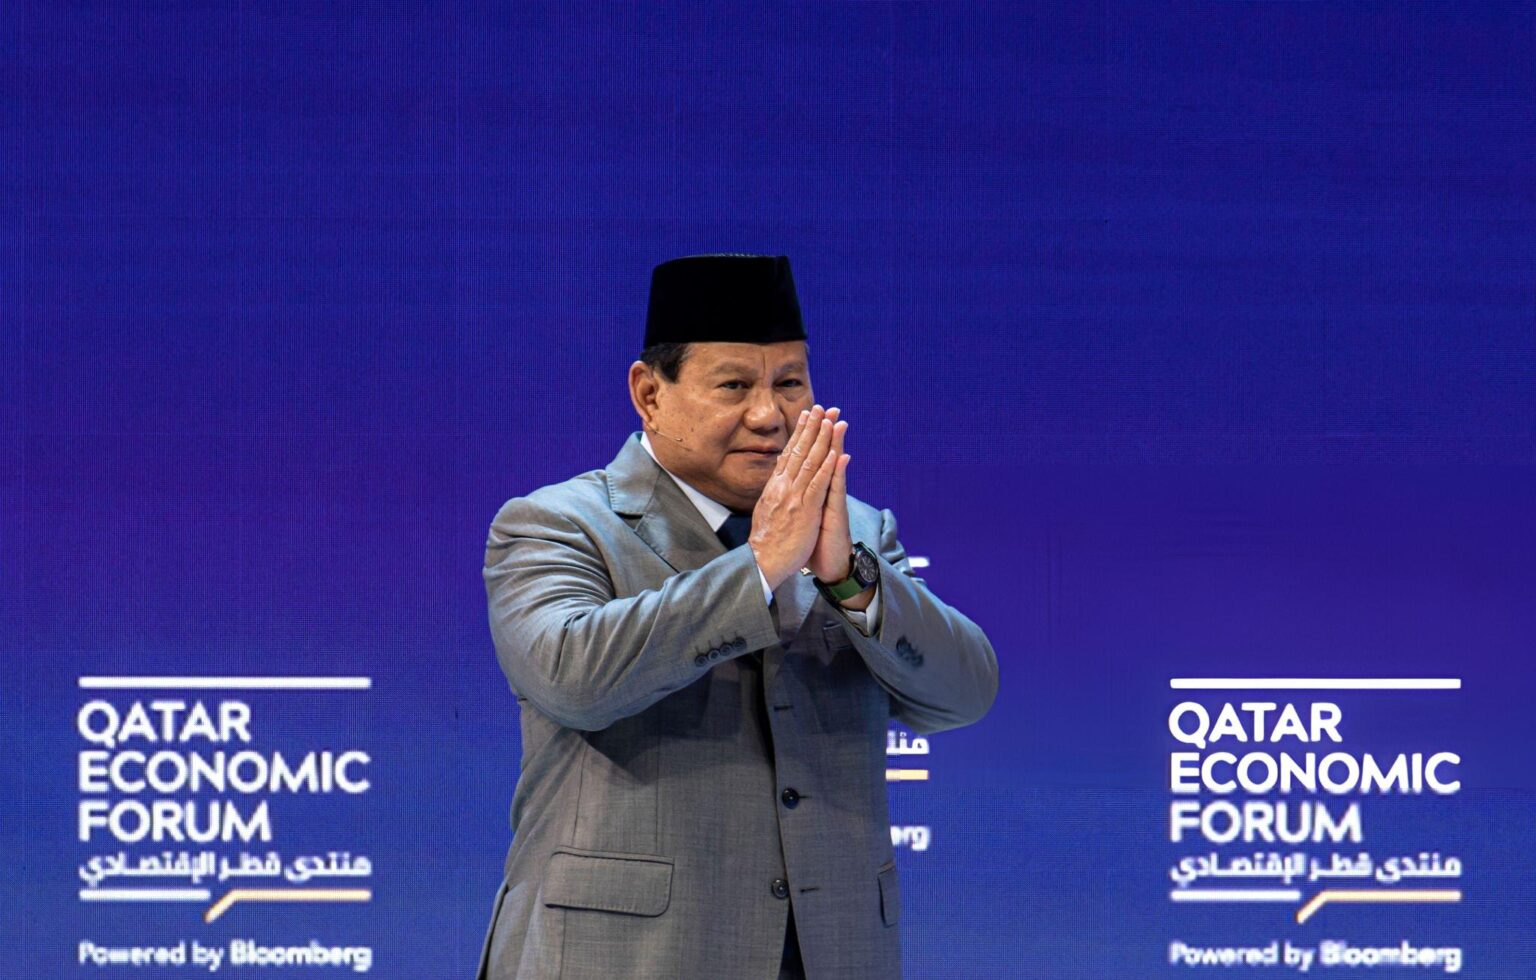 Prabowo Subianto Optimistic Indonesia’s Economy Can Grow 8% in the Next 2-3 Years